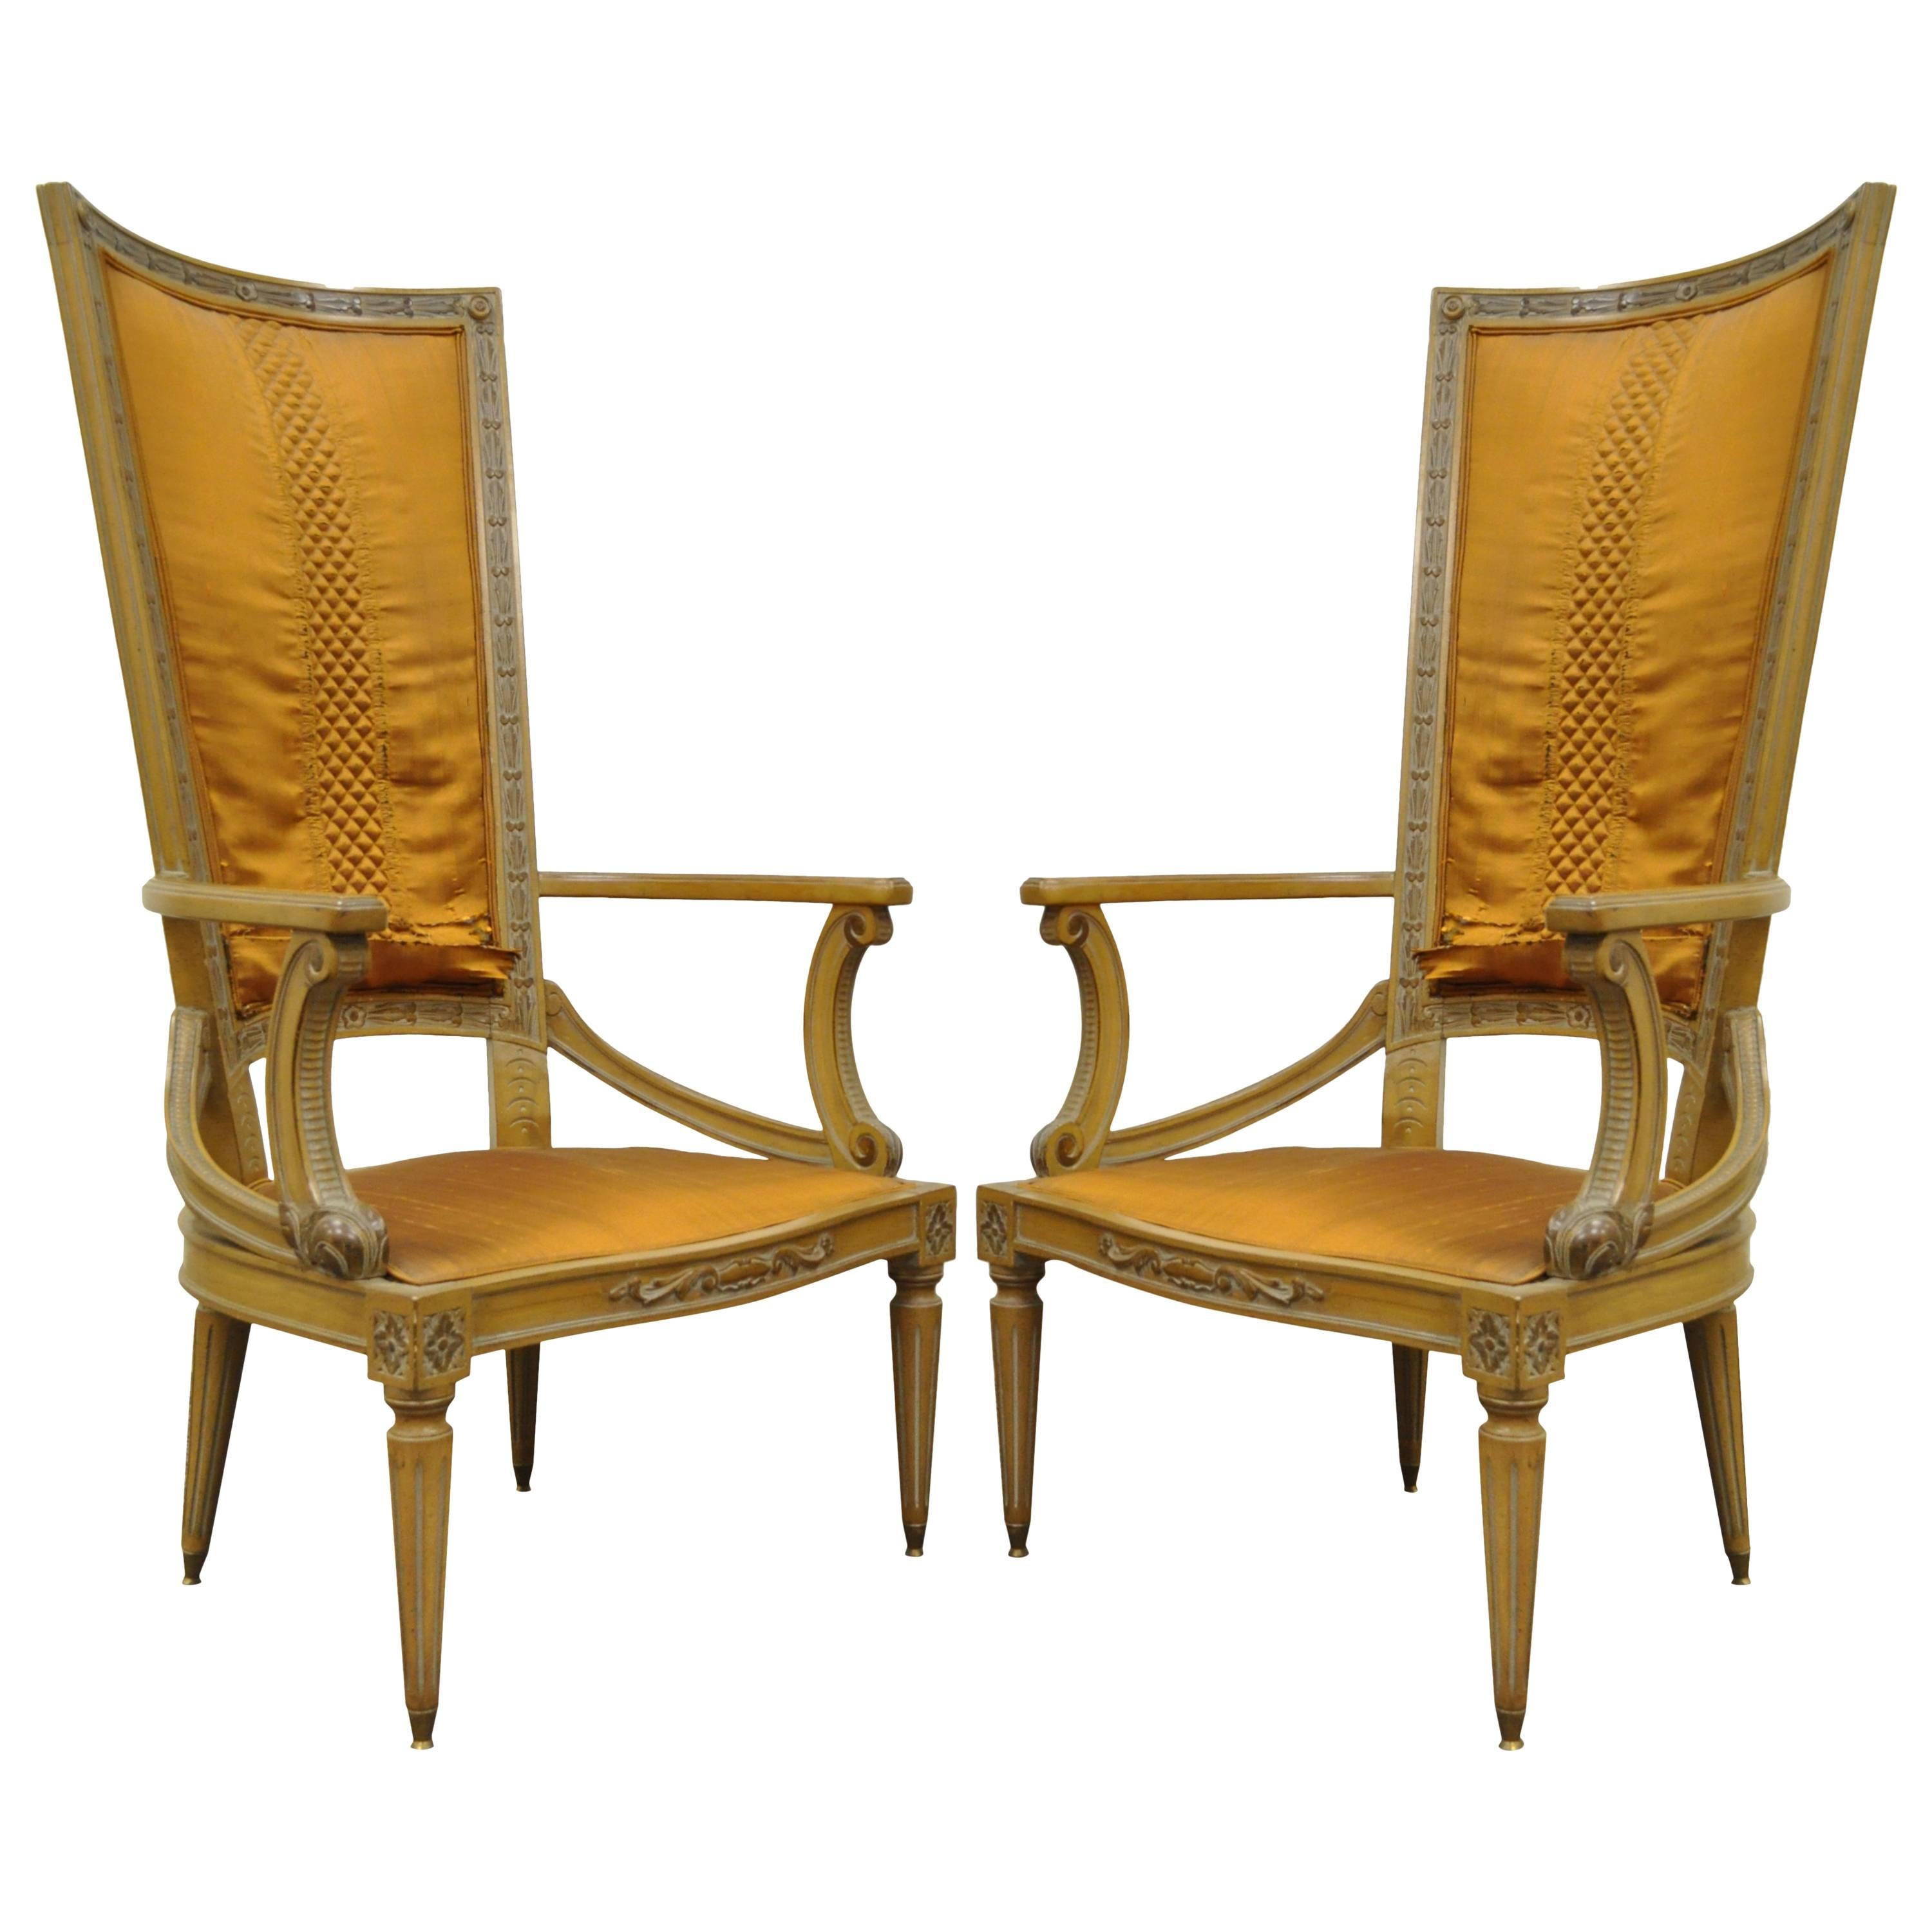 Pair of Tall Back Hollywood Regency Sculptural Arm Chairs after Dorothy Draper